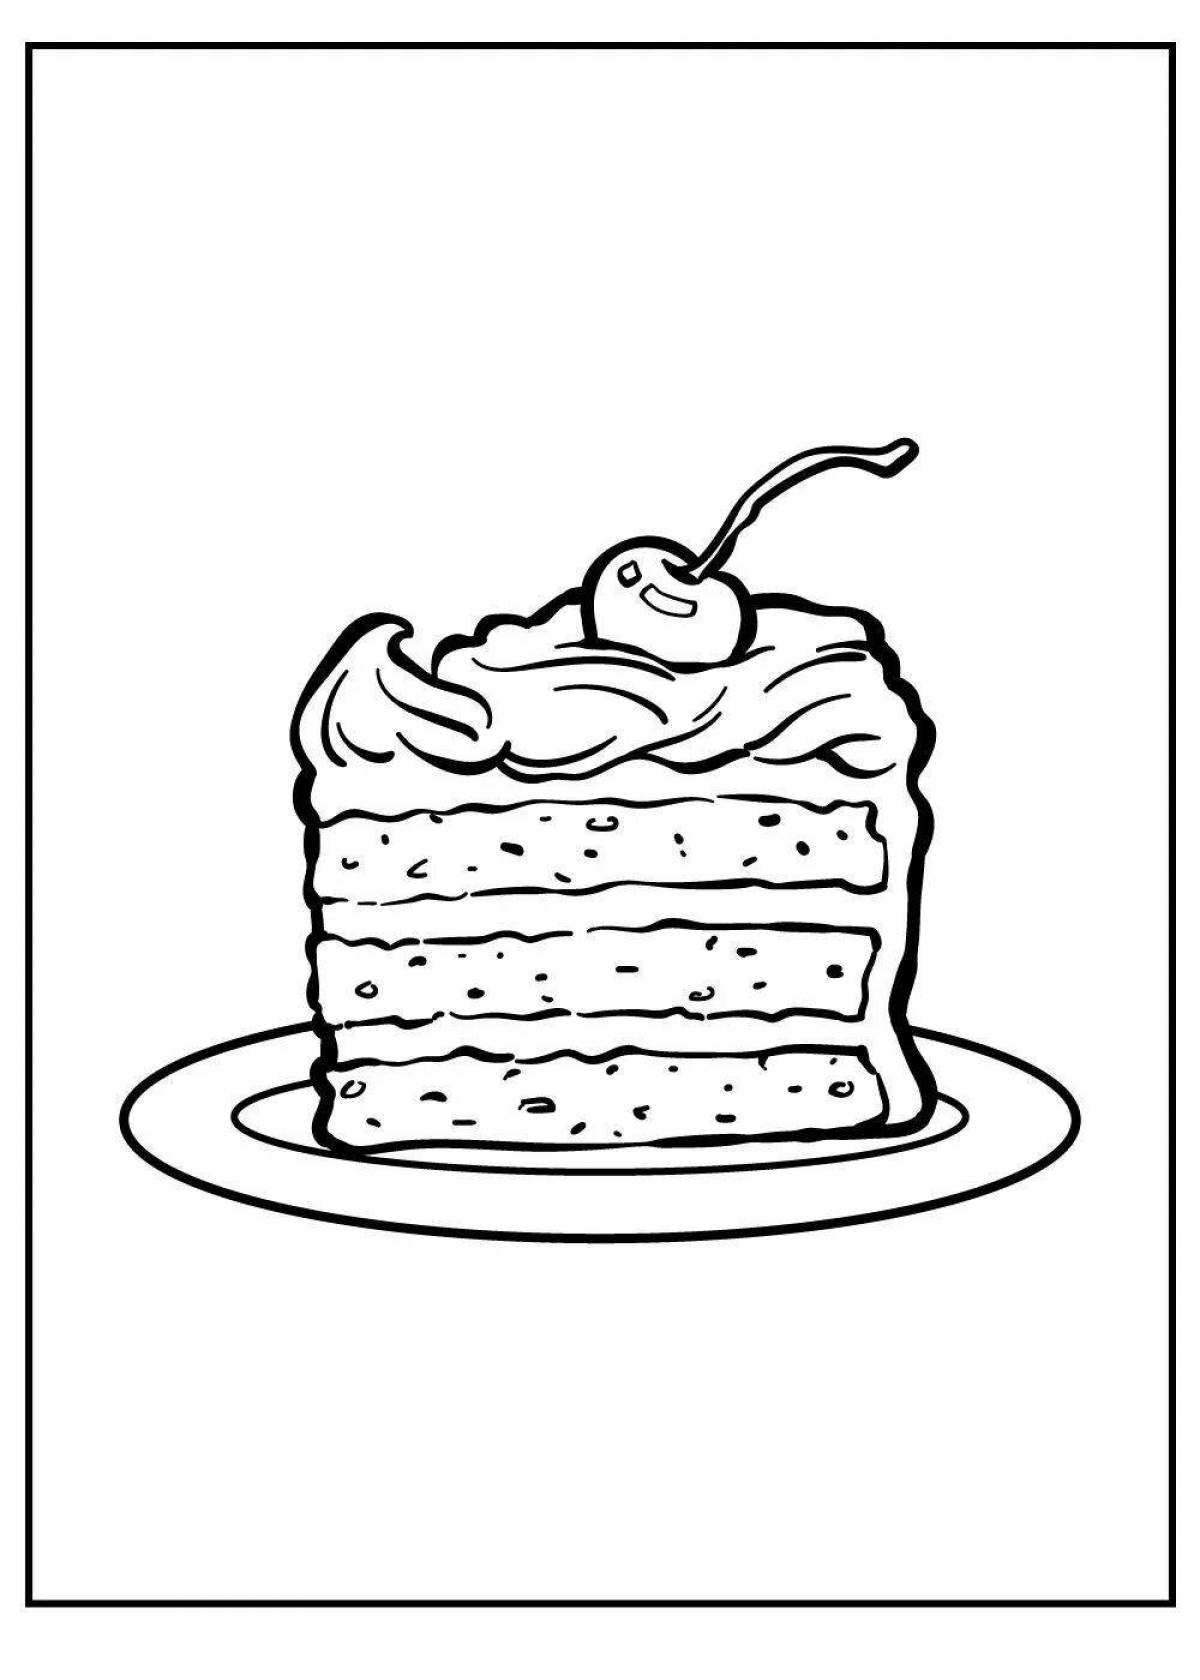 Coloring page teasing chocolate cake